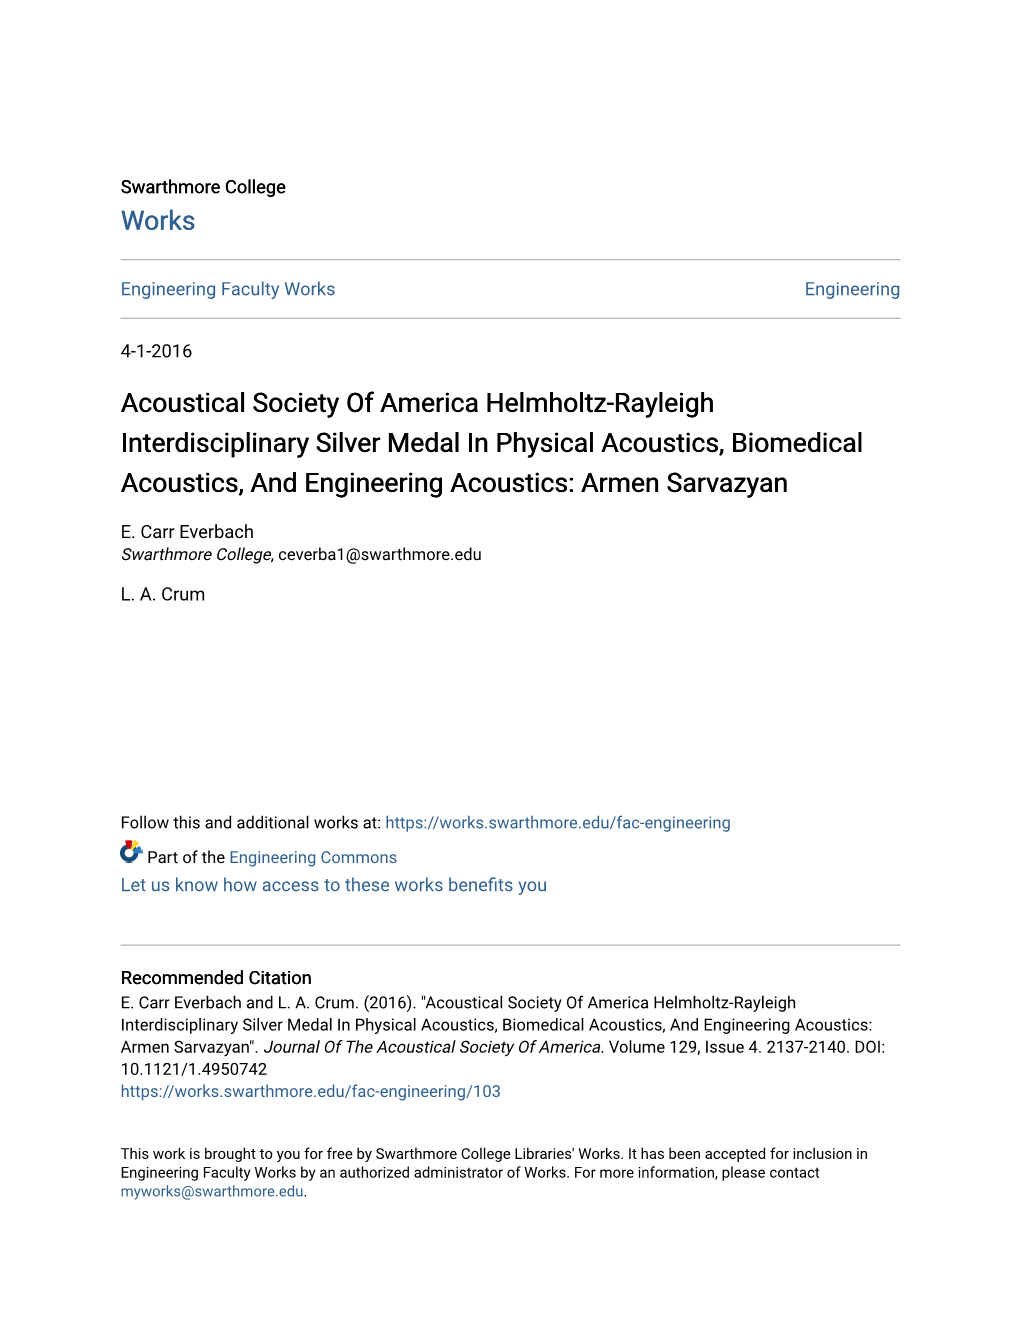 Acoustical Society of America Helmholtz-Rayleigh Interdisciplinary Silver Medal in Physical Acoustics, Biomedical Acoustics